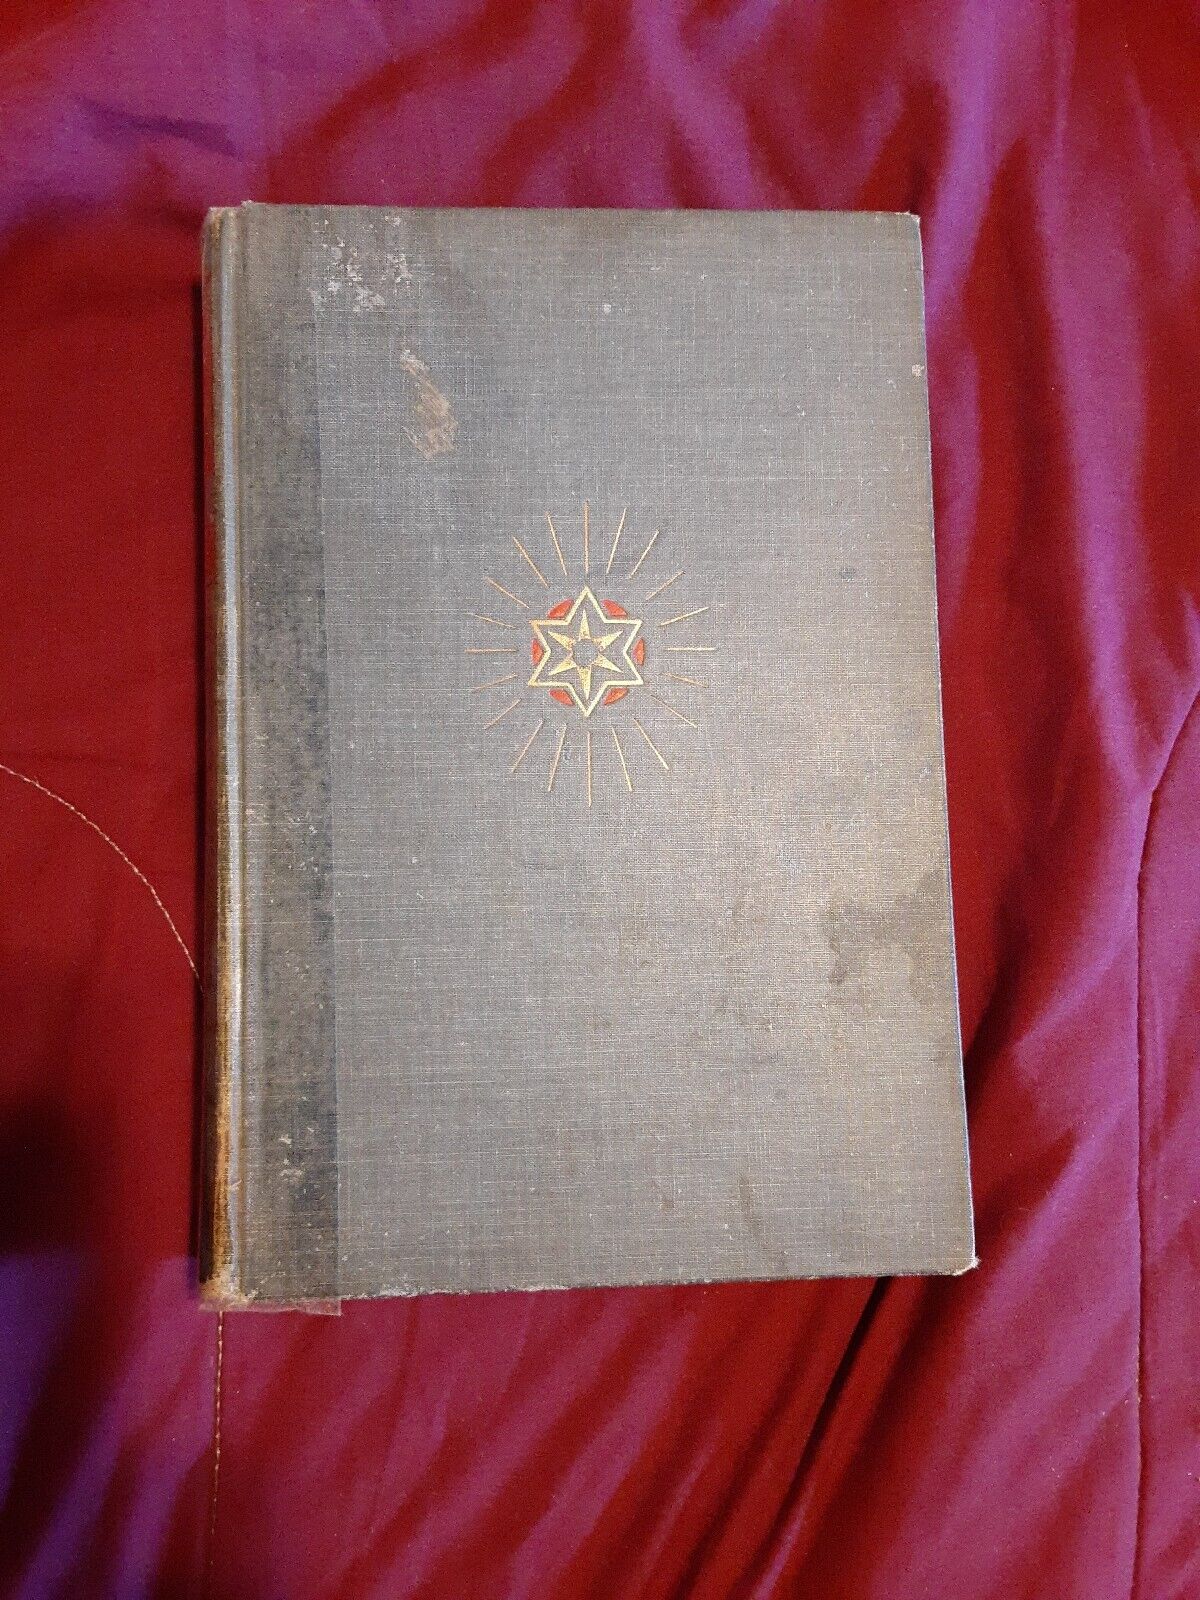 Jewish Magic and Superstition: A Study in Folk Religion, 1939 RARE 1st Edition